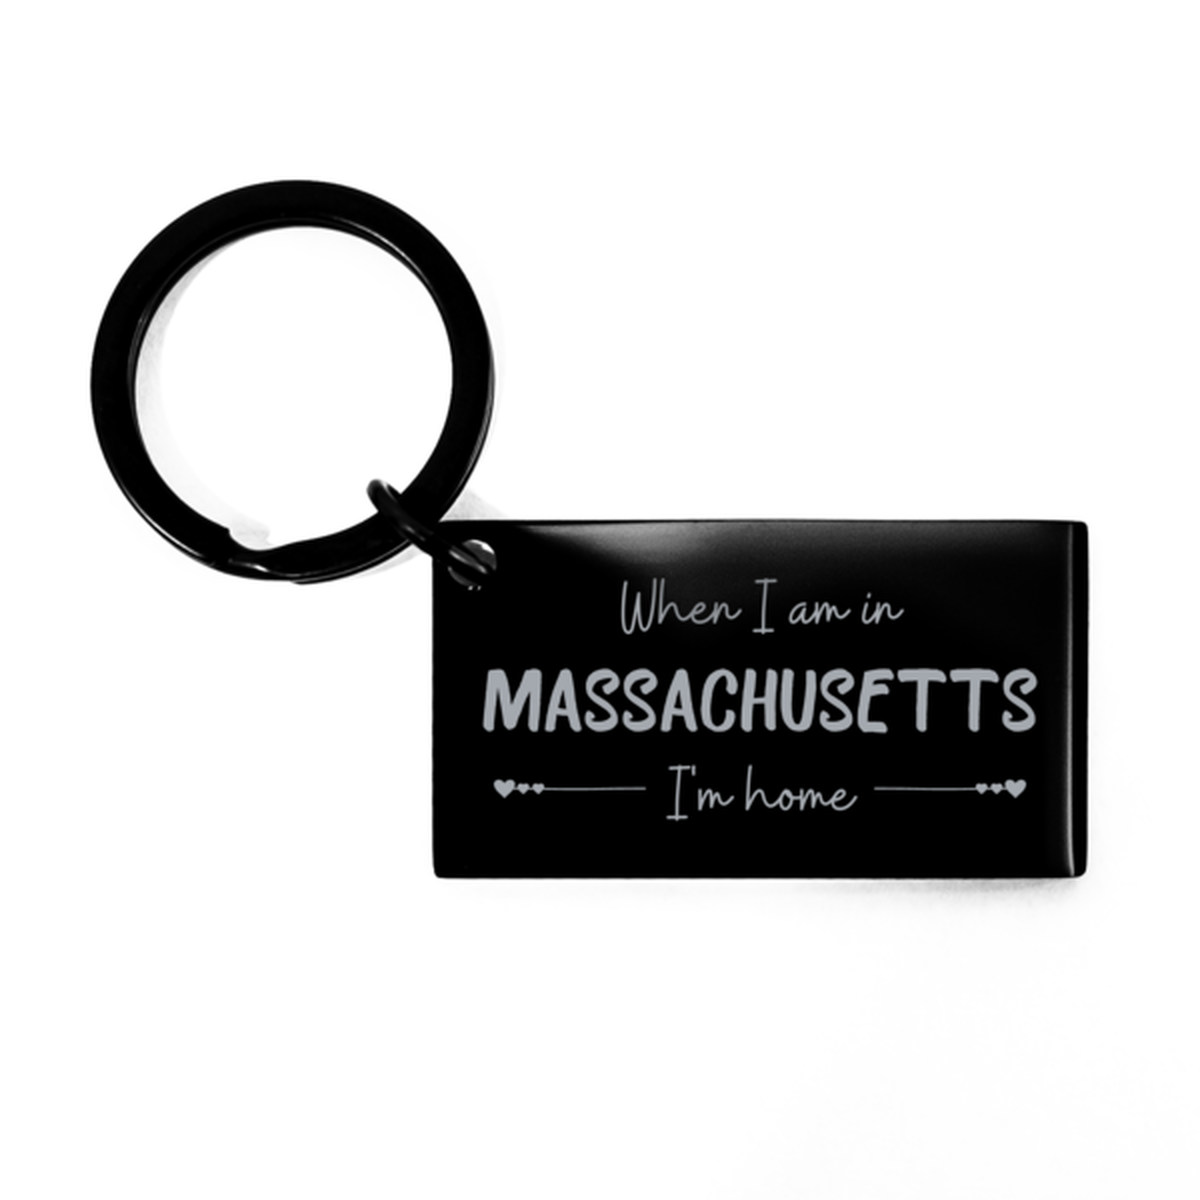 When I am in Massachusetts I'm home Keychain, Cheap Gifts For Massachusetts, State Massachusetts Birthday Gifts for Friends Coworker